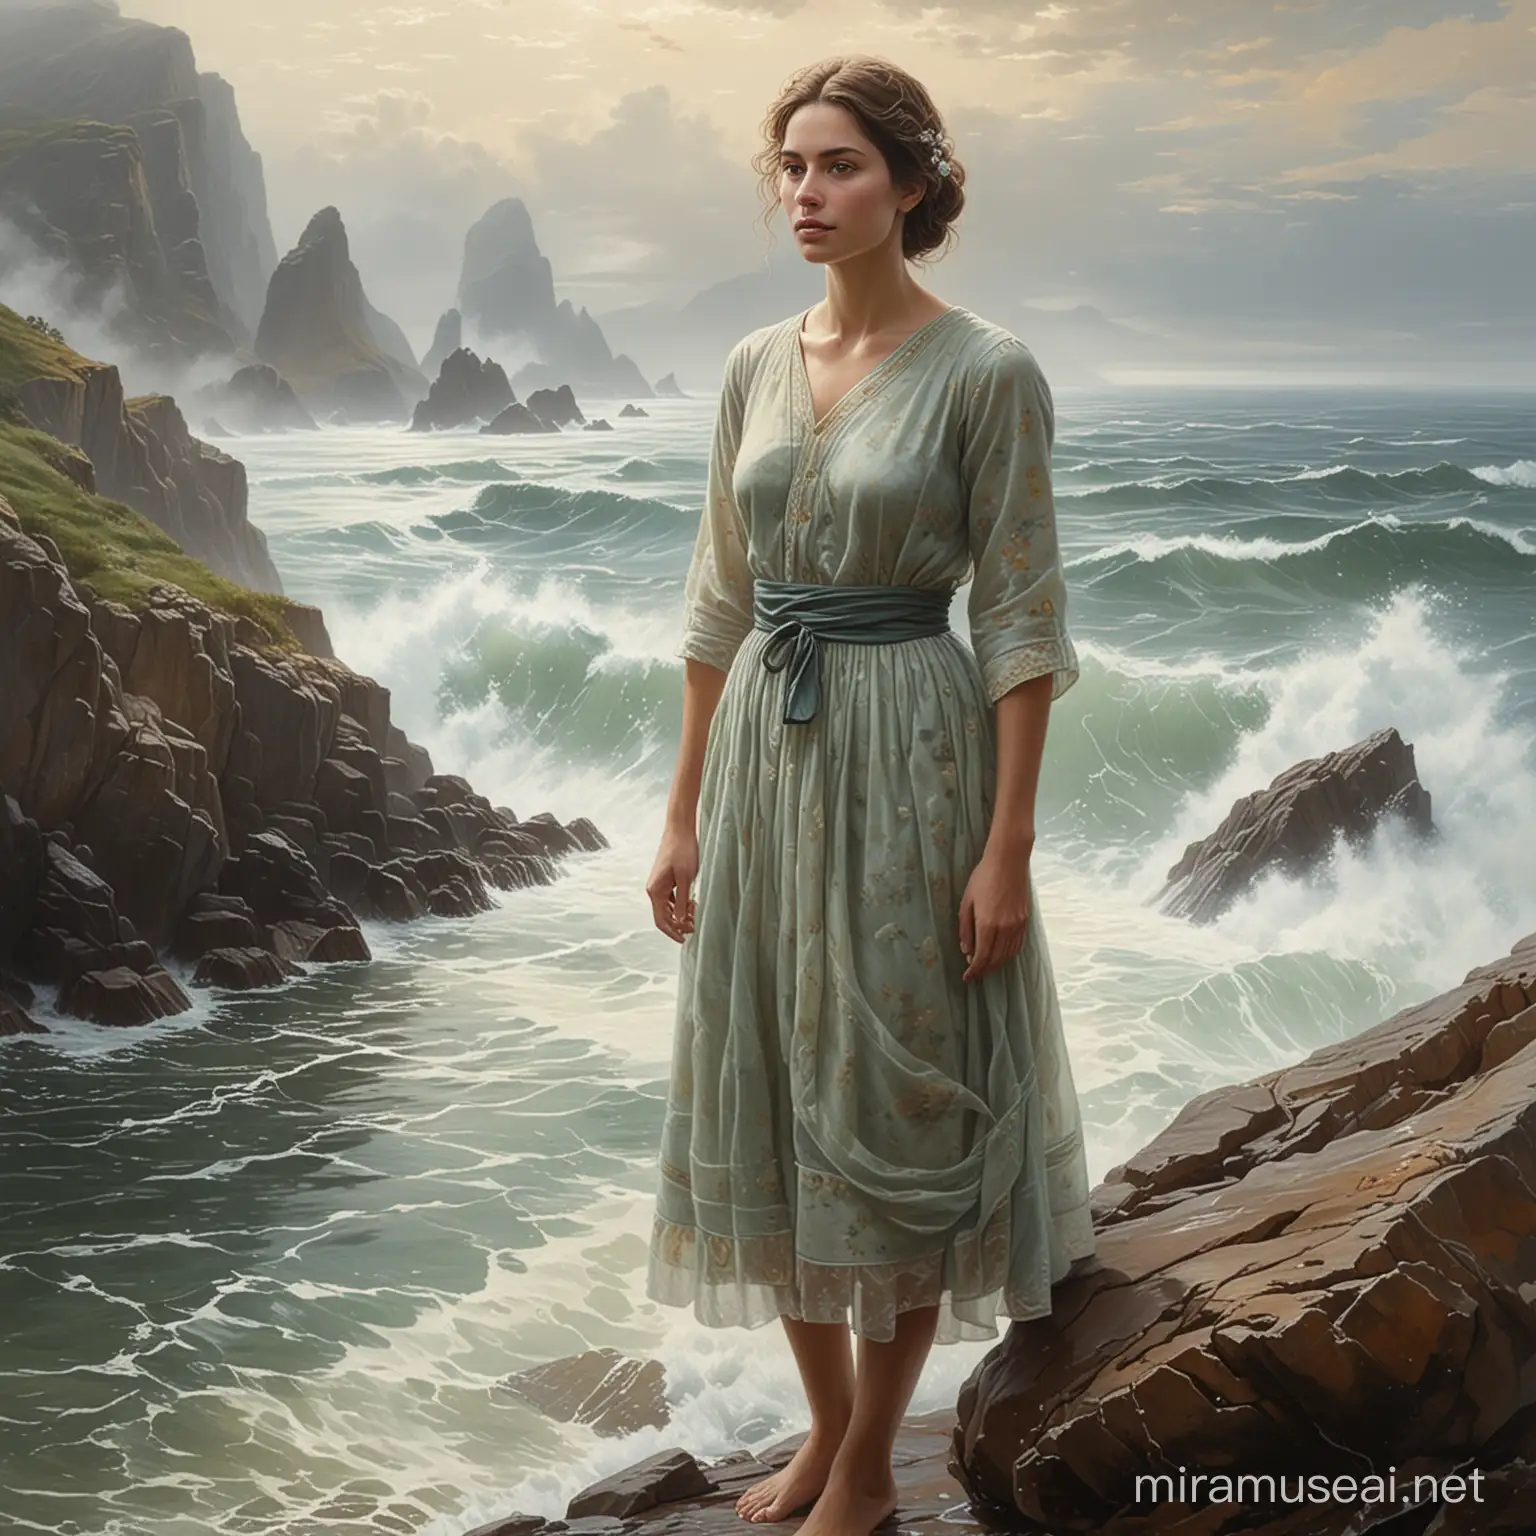 The image is a painting of a person wearing a dress. It depicts a human face and is a portrait of a lady.The image depicts a large rock in the water. It showcases a rocky coastal or oceanic landform jutting out into the sea. The scene captures the natural beauty of the landscape with fog in the background.